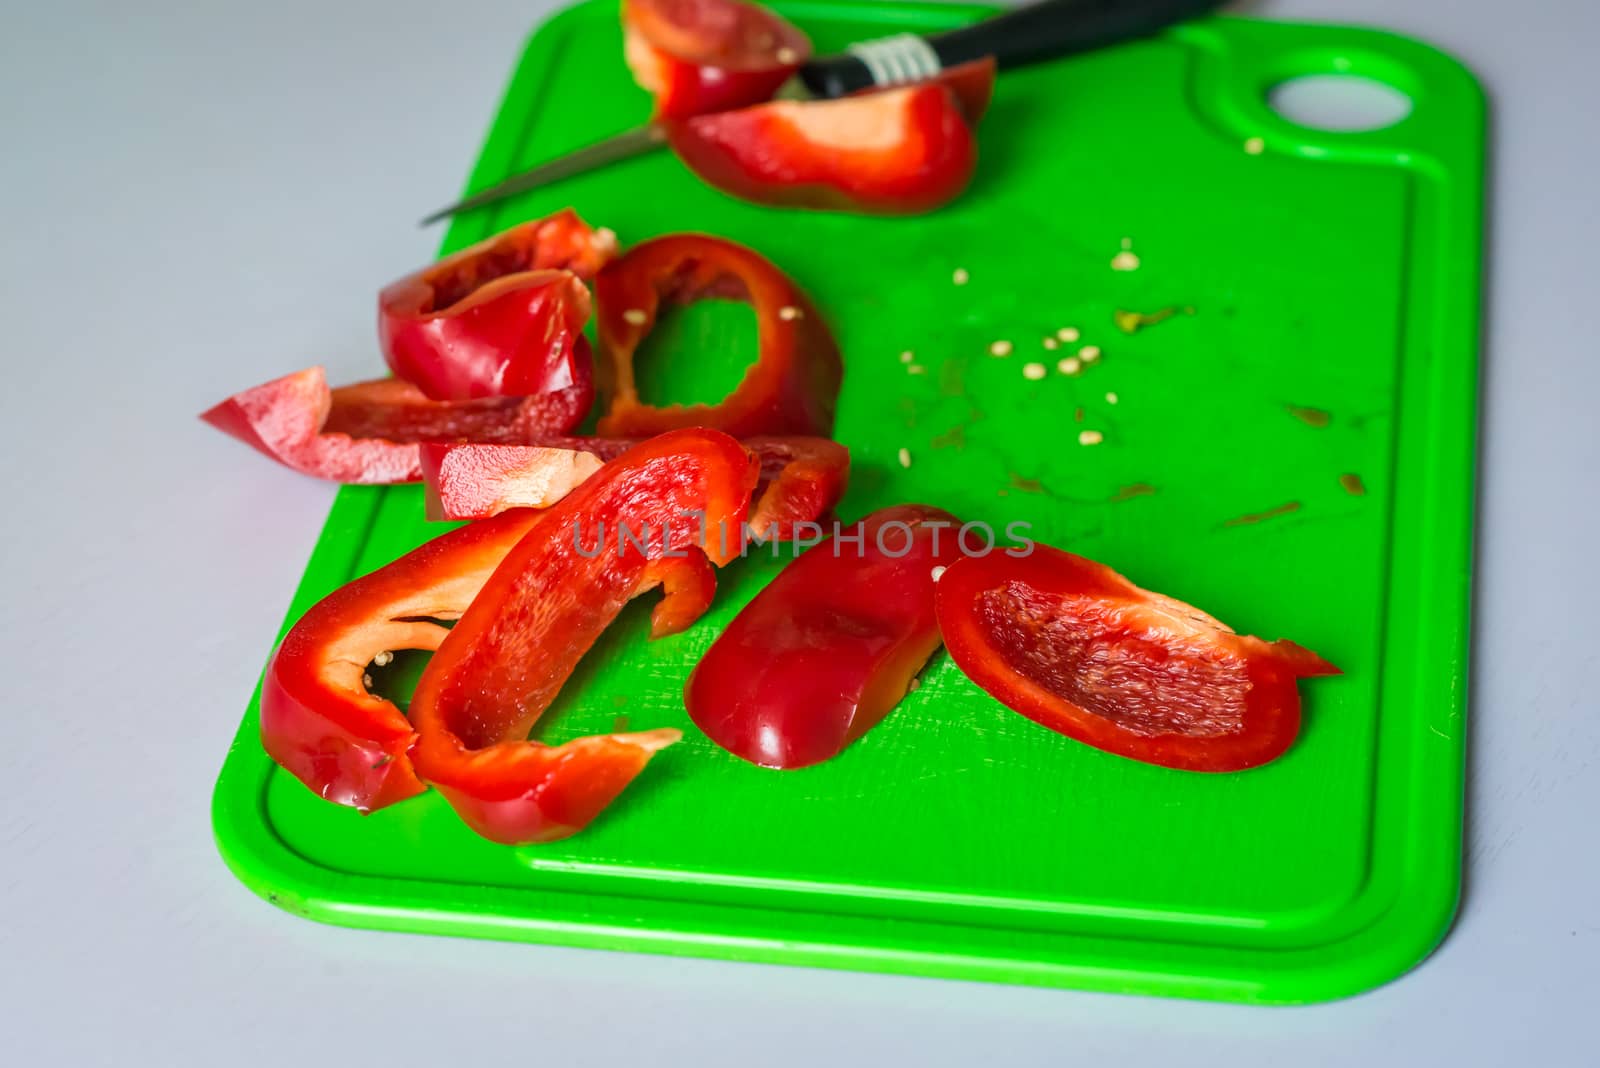 chopped red bell pepper on the plastic Board